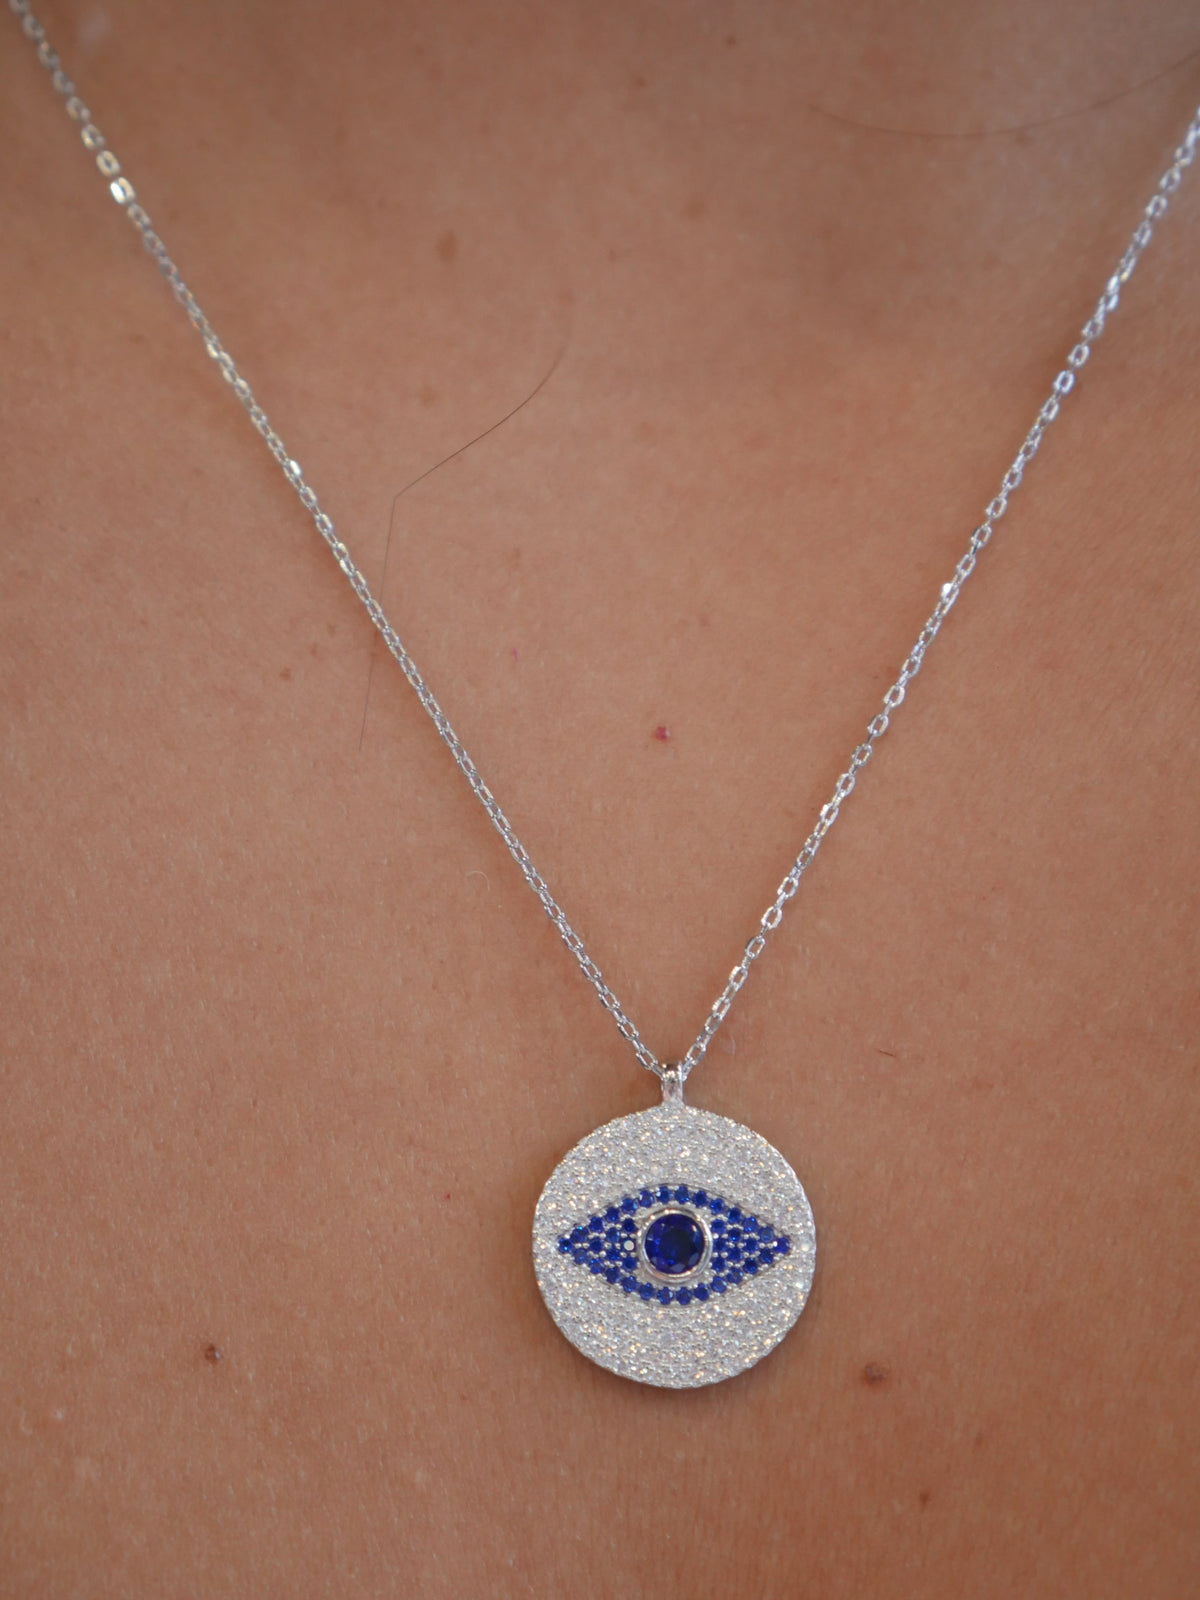 evil eye necklace circle with center navy blue eye diamond cz cubic zirconia rhinestone sterling silver white gold necklace, waterproof, trending unique necklaces for protection. Gift ideas for men and woman, unisex evil eye necklaces, dainty, waterproof Kesley Boutique